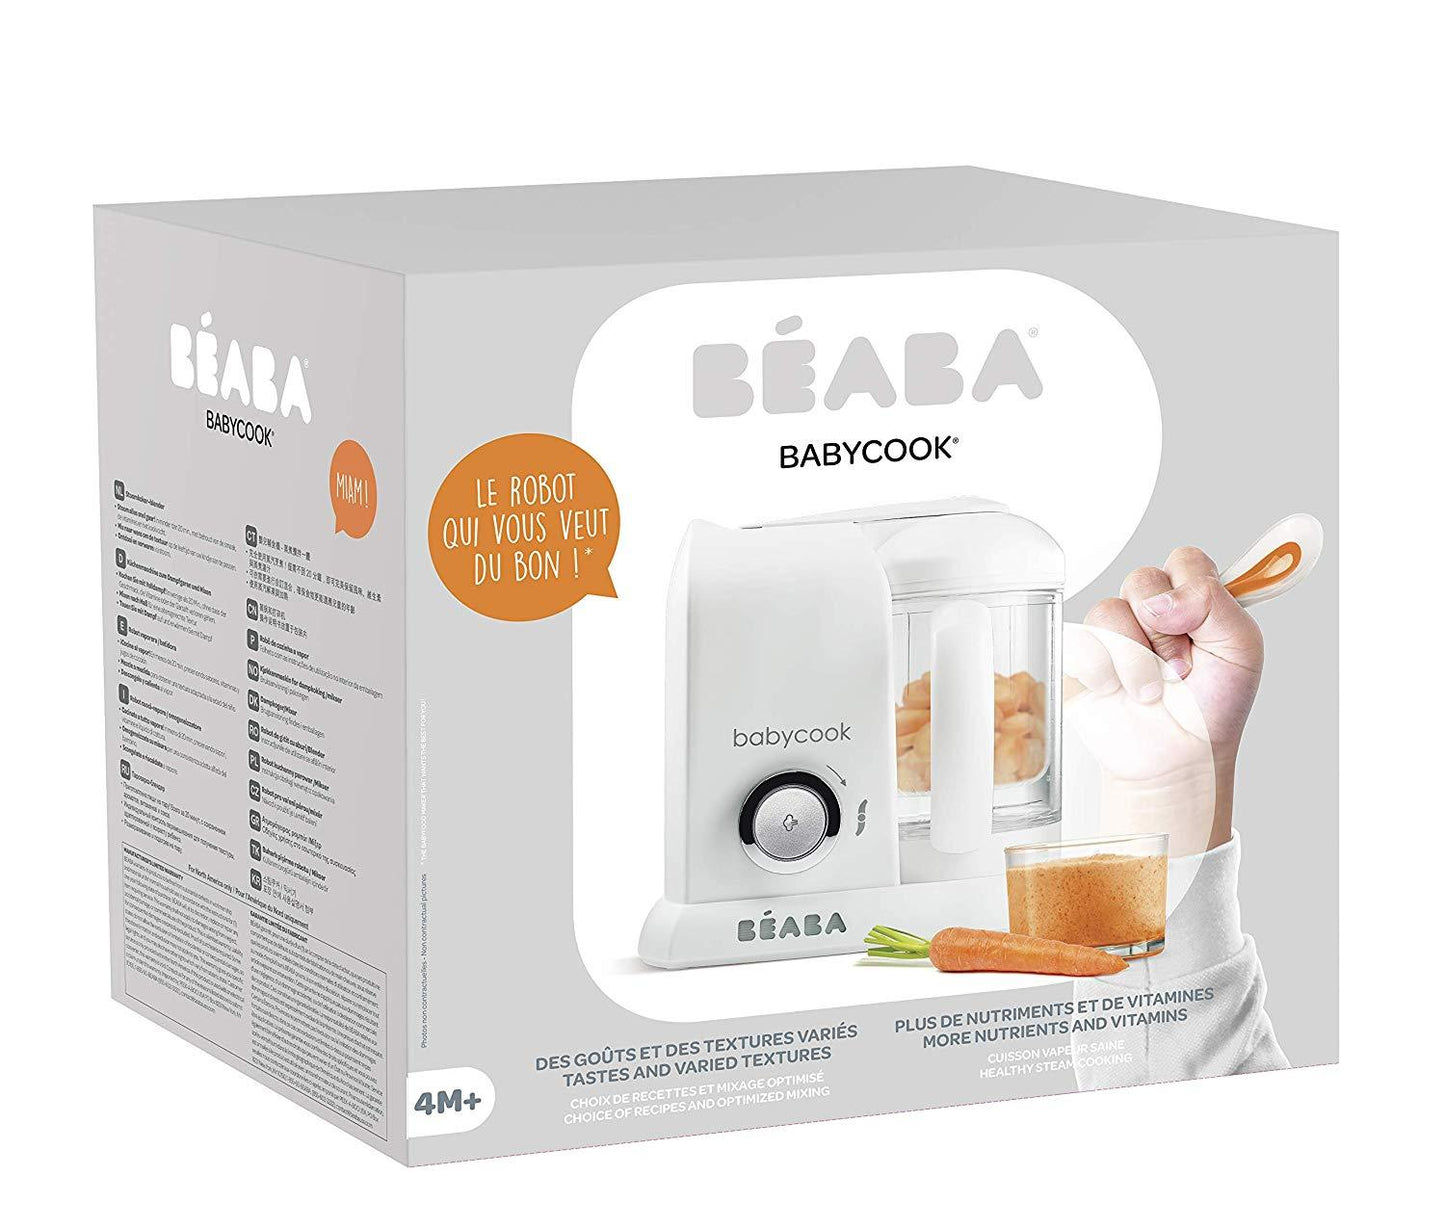 Beaba Babycook® Branco/Cinza Anne Claire Baby Store 